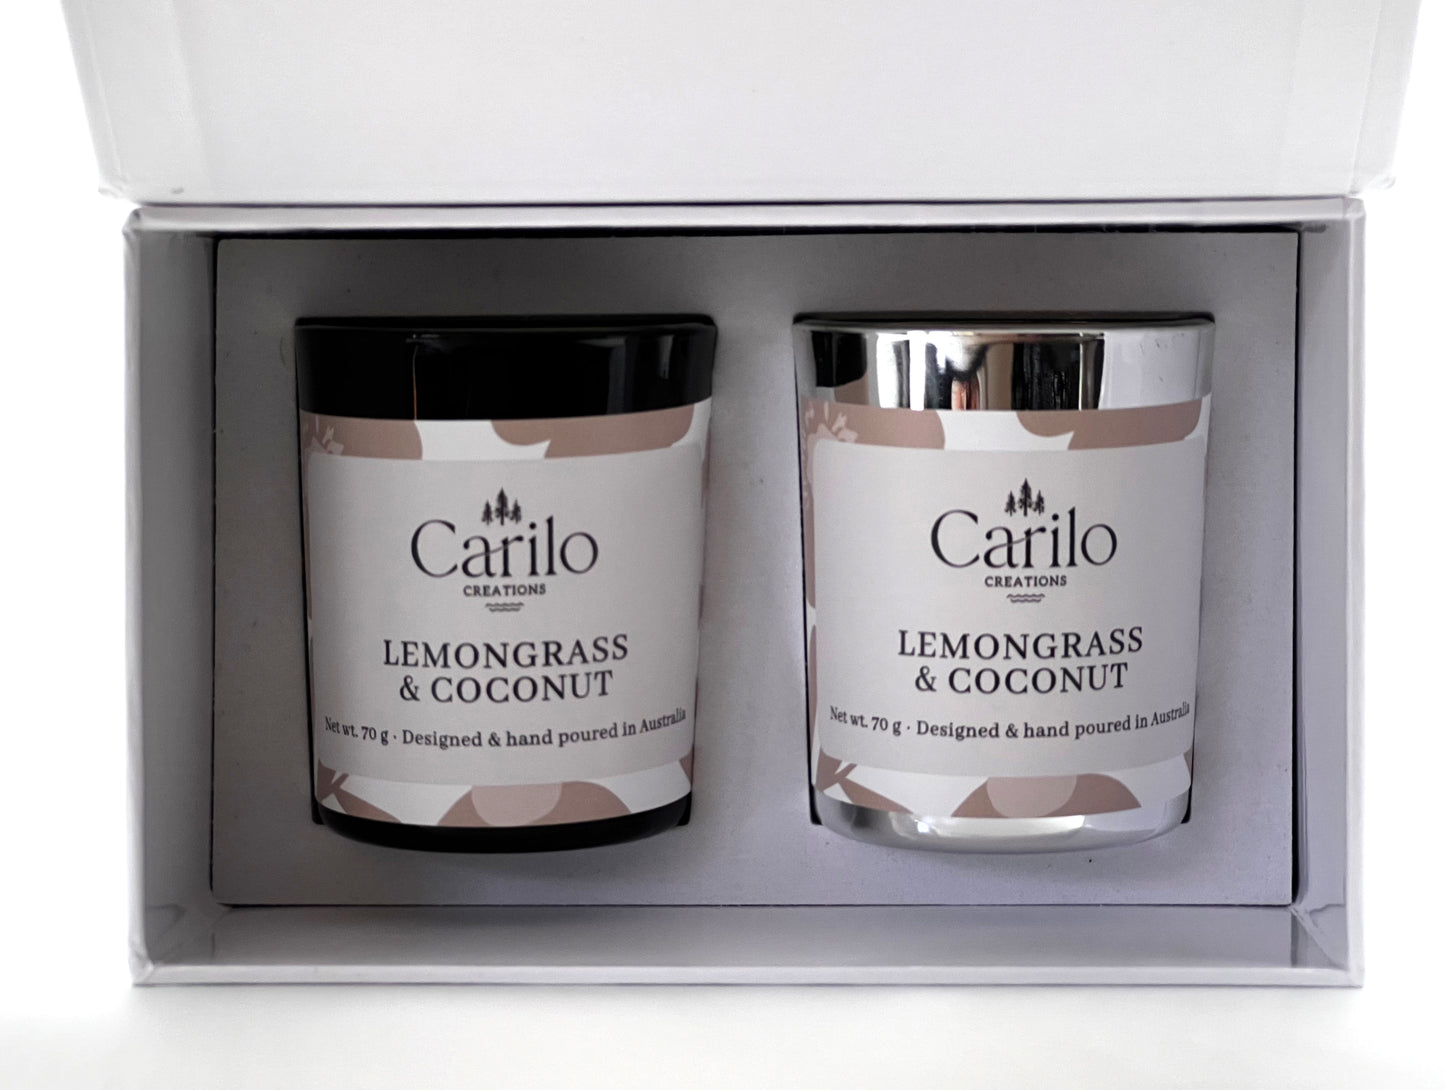 LEMONGRASS & COCONUT DUO SCENTED CANDLES - 70g each